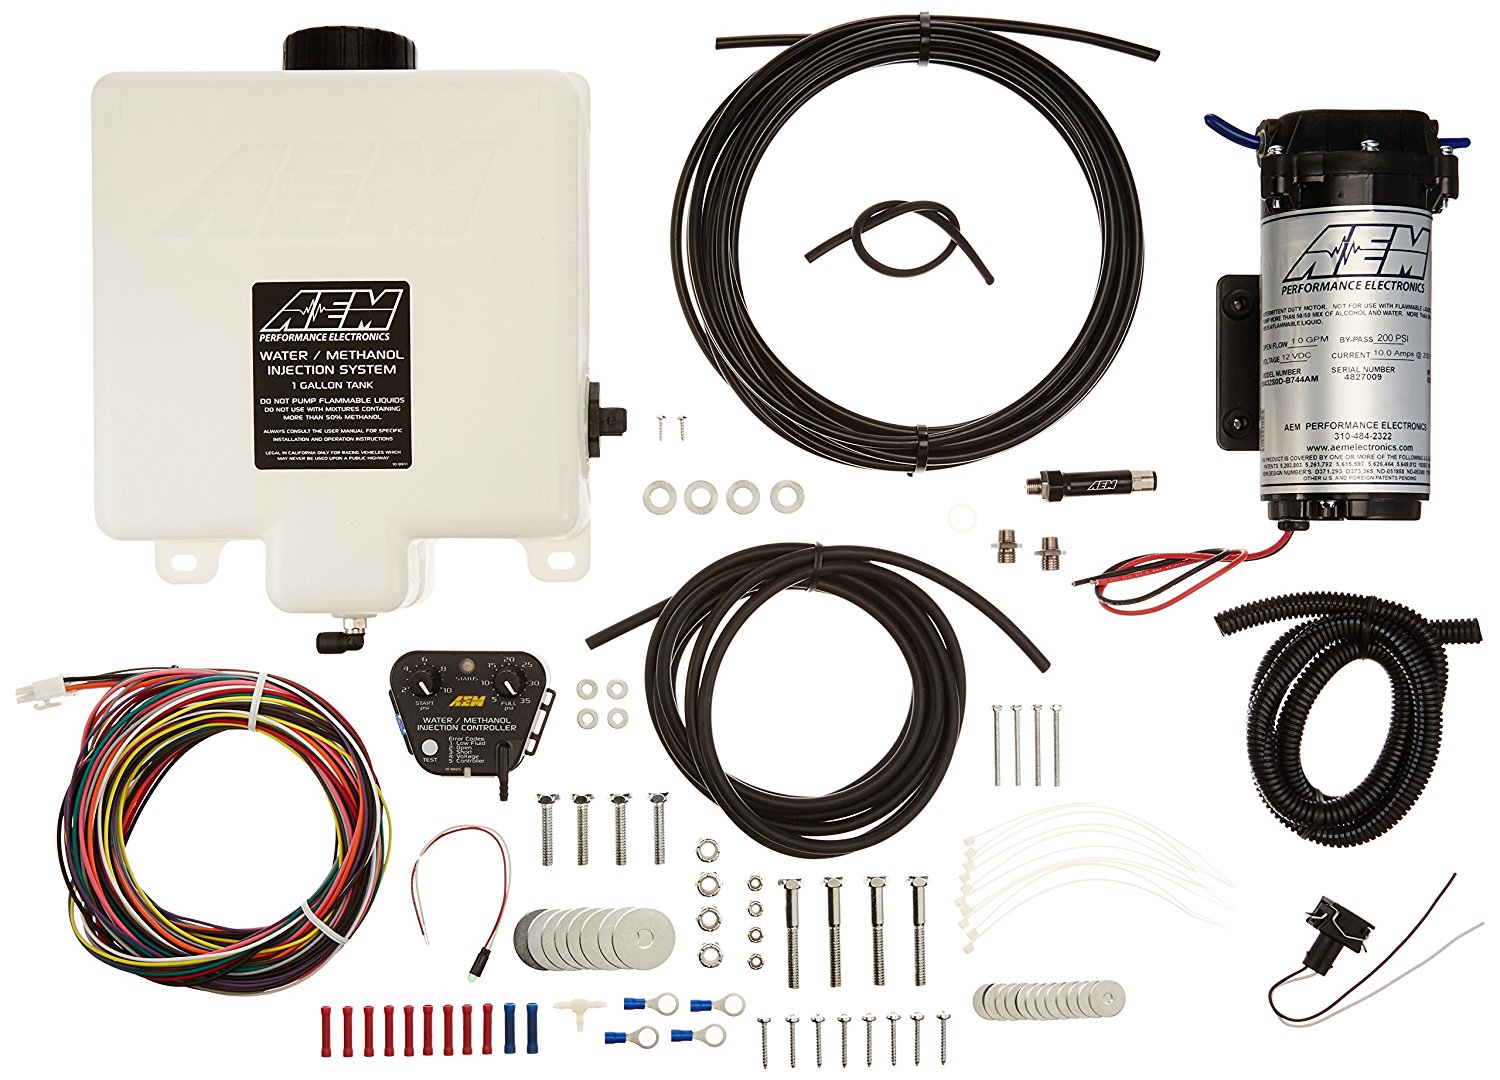 AEM V2 1-Gallon Water/Methanol Injection Kit with Internal MAP Sensor for Corvette, Camaro and others